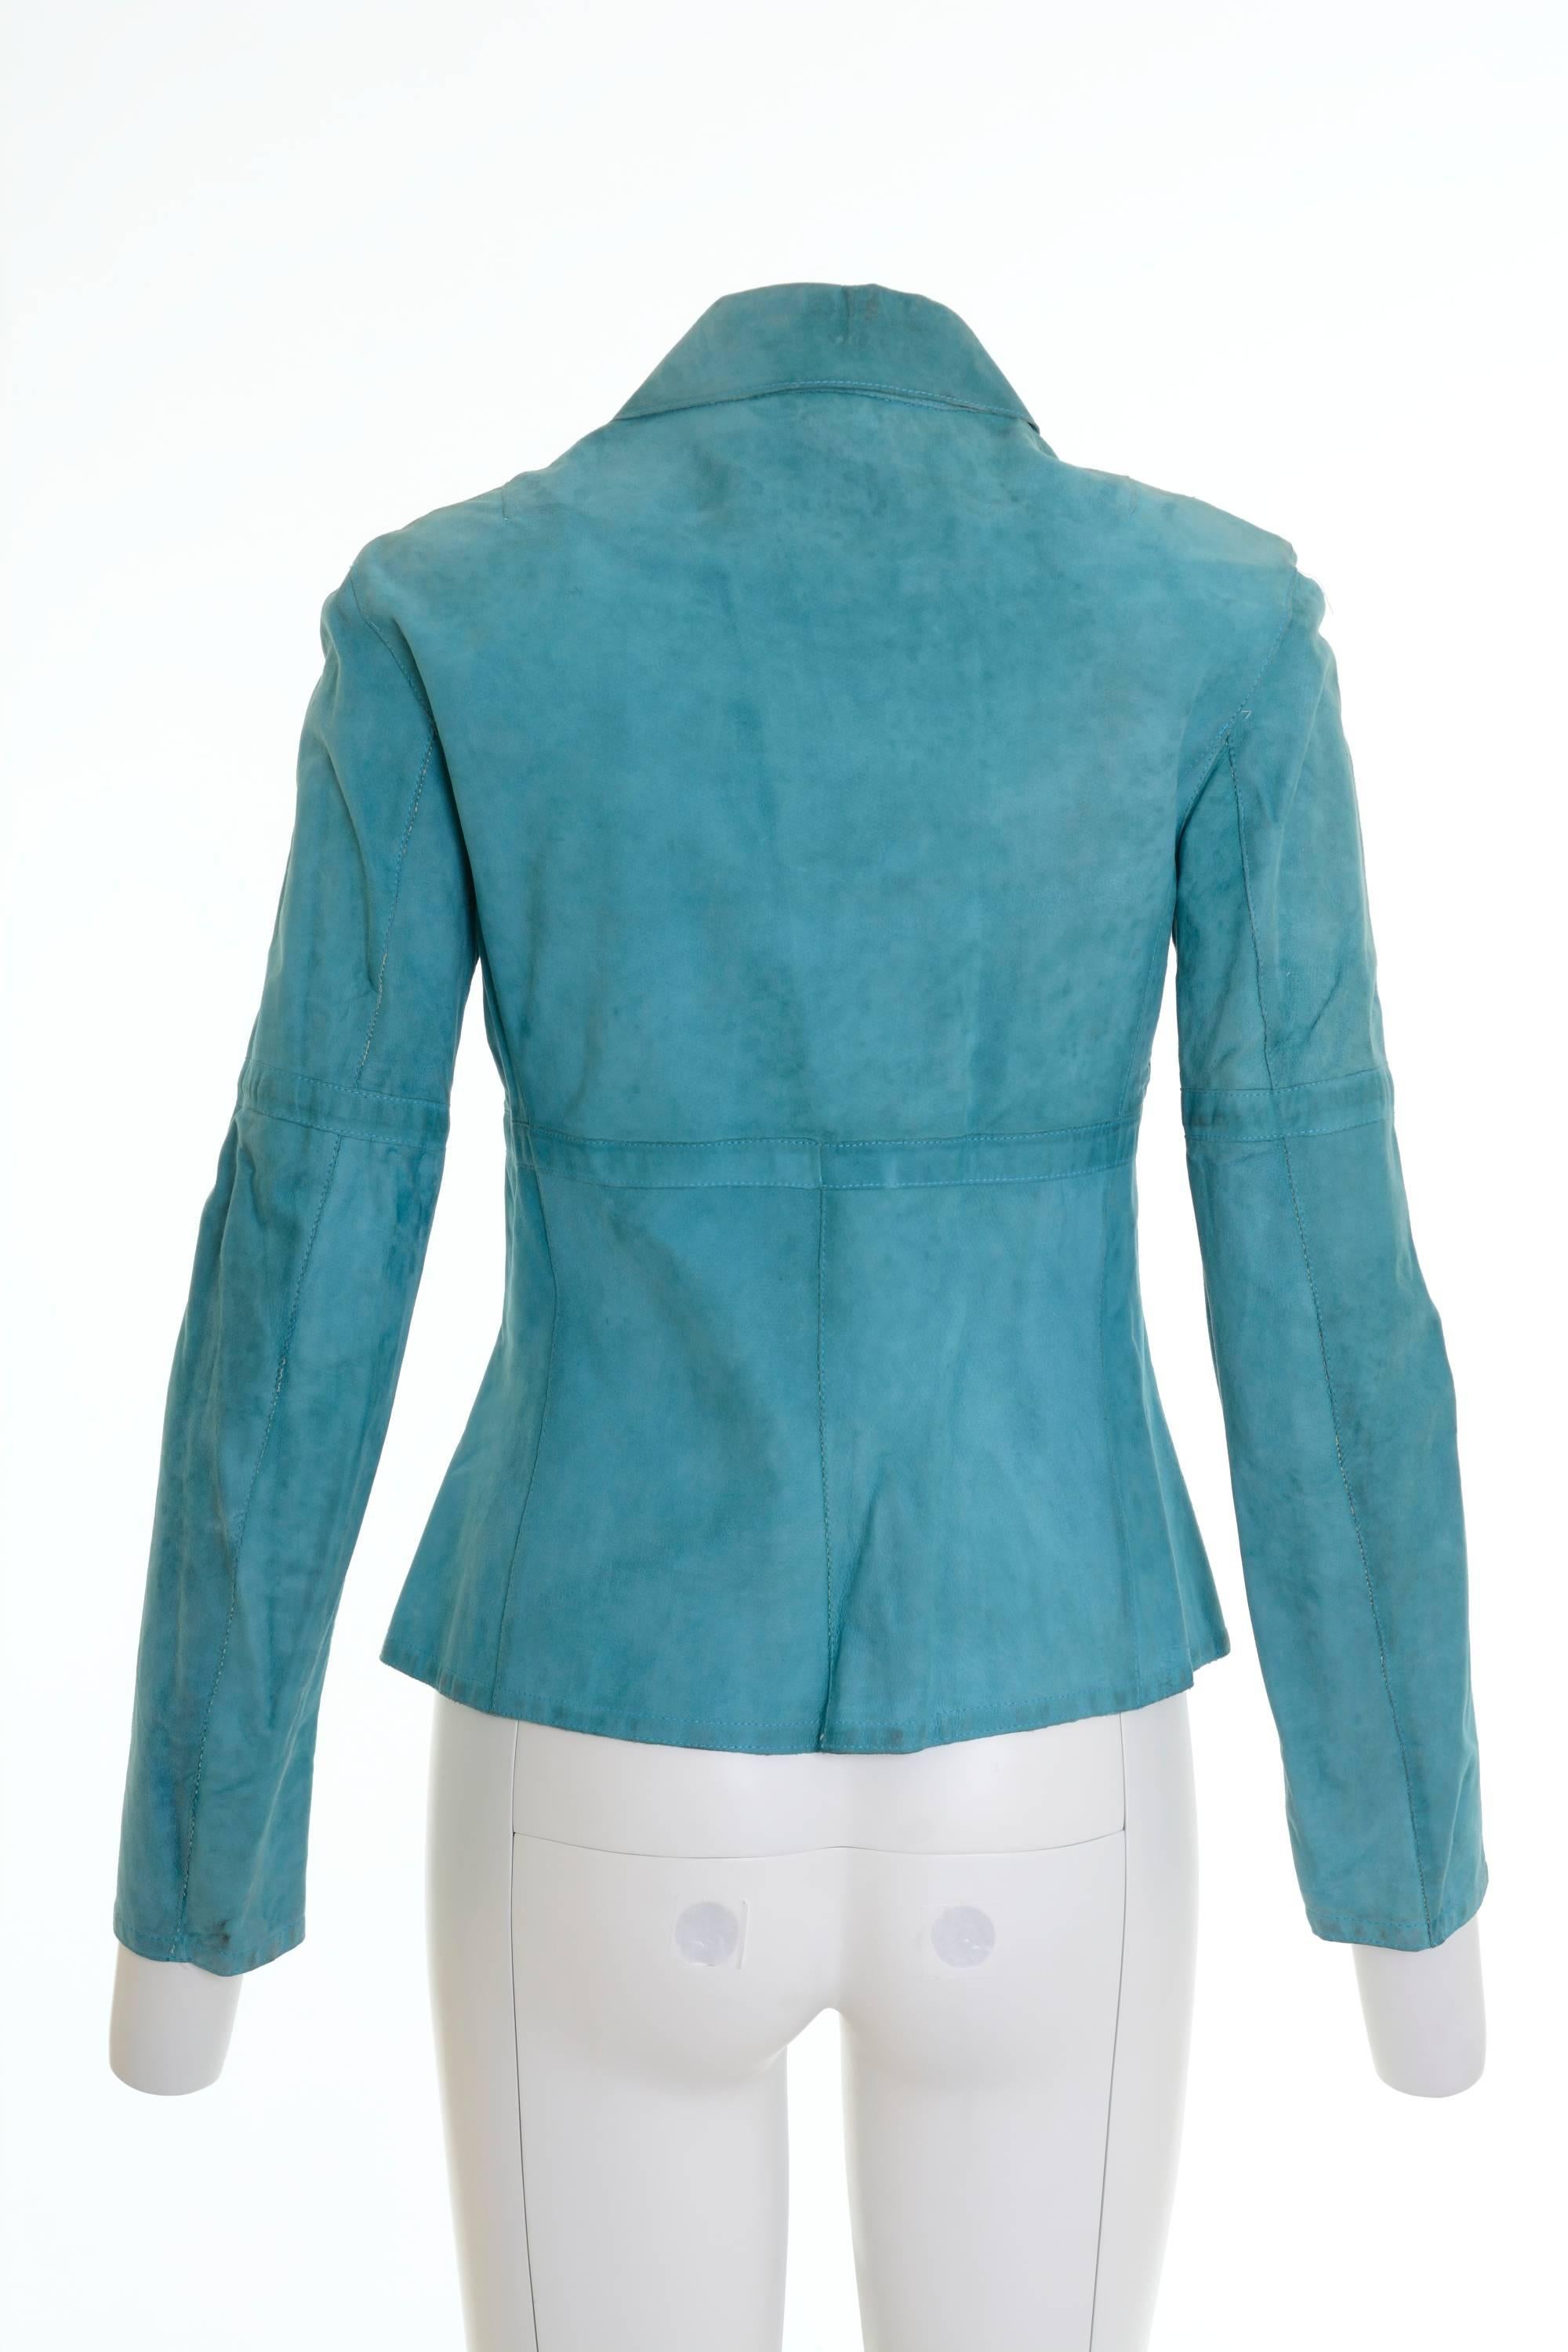 Emilio Pucci turquoise suede leather jacket, zip closure, top stitches, printed mesh lining, side pockets, patch and inside pockets. Made in Italy 

Good Condition

Label: Emilio Pucci Firenze
Fabric: 100% suede leather
Colors: light blue, green,